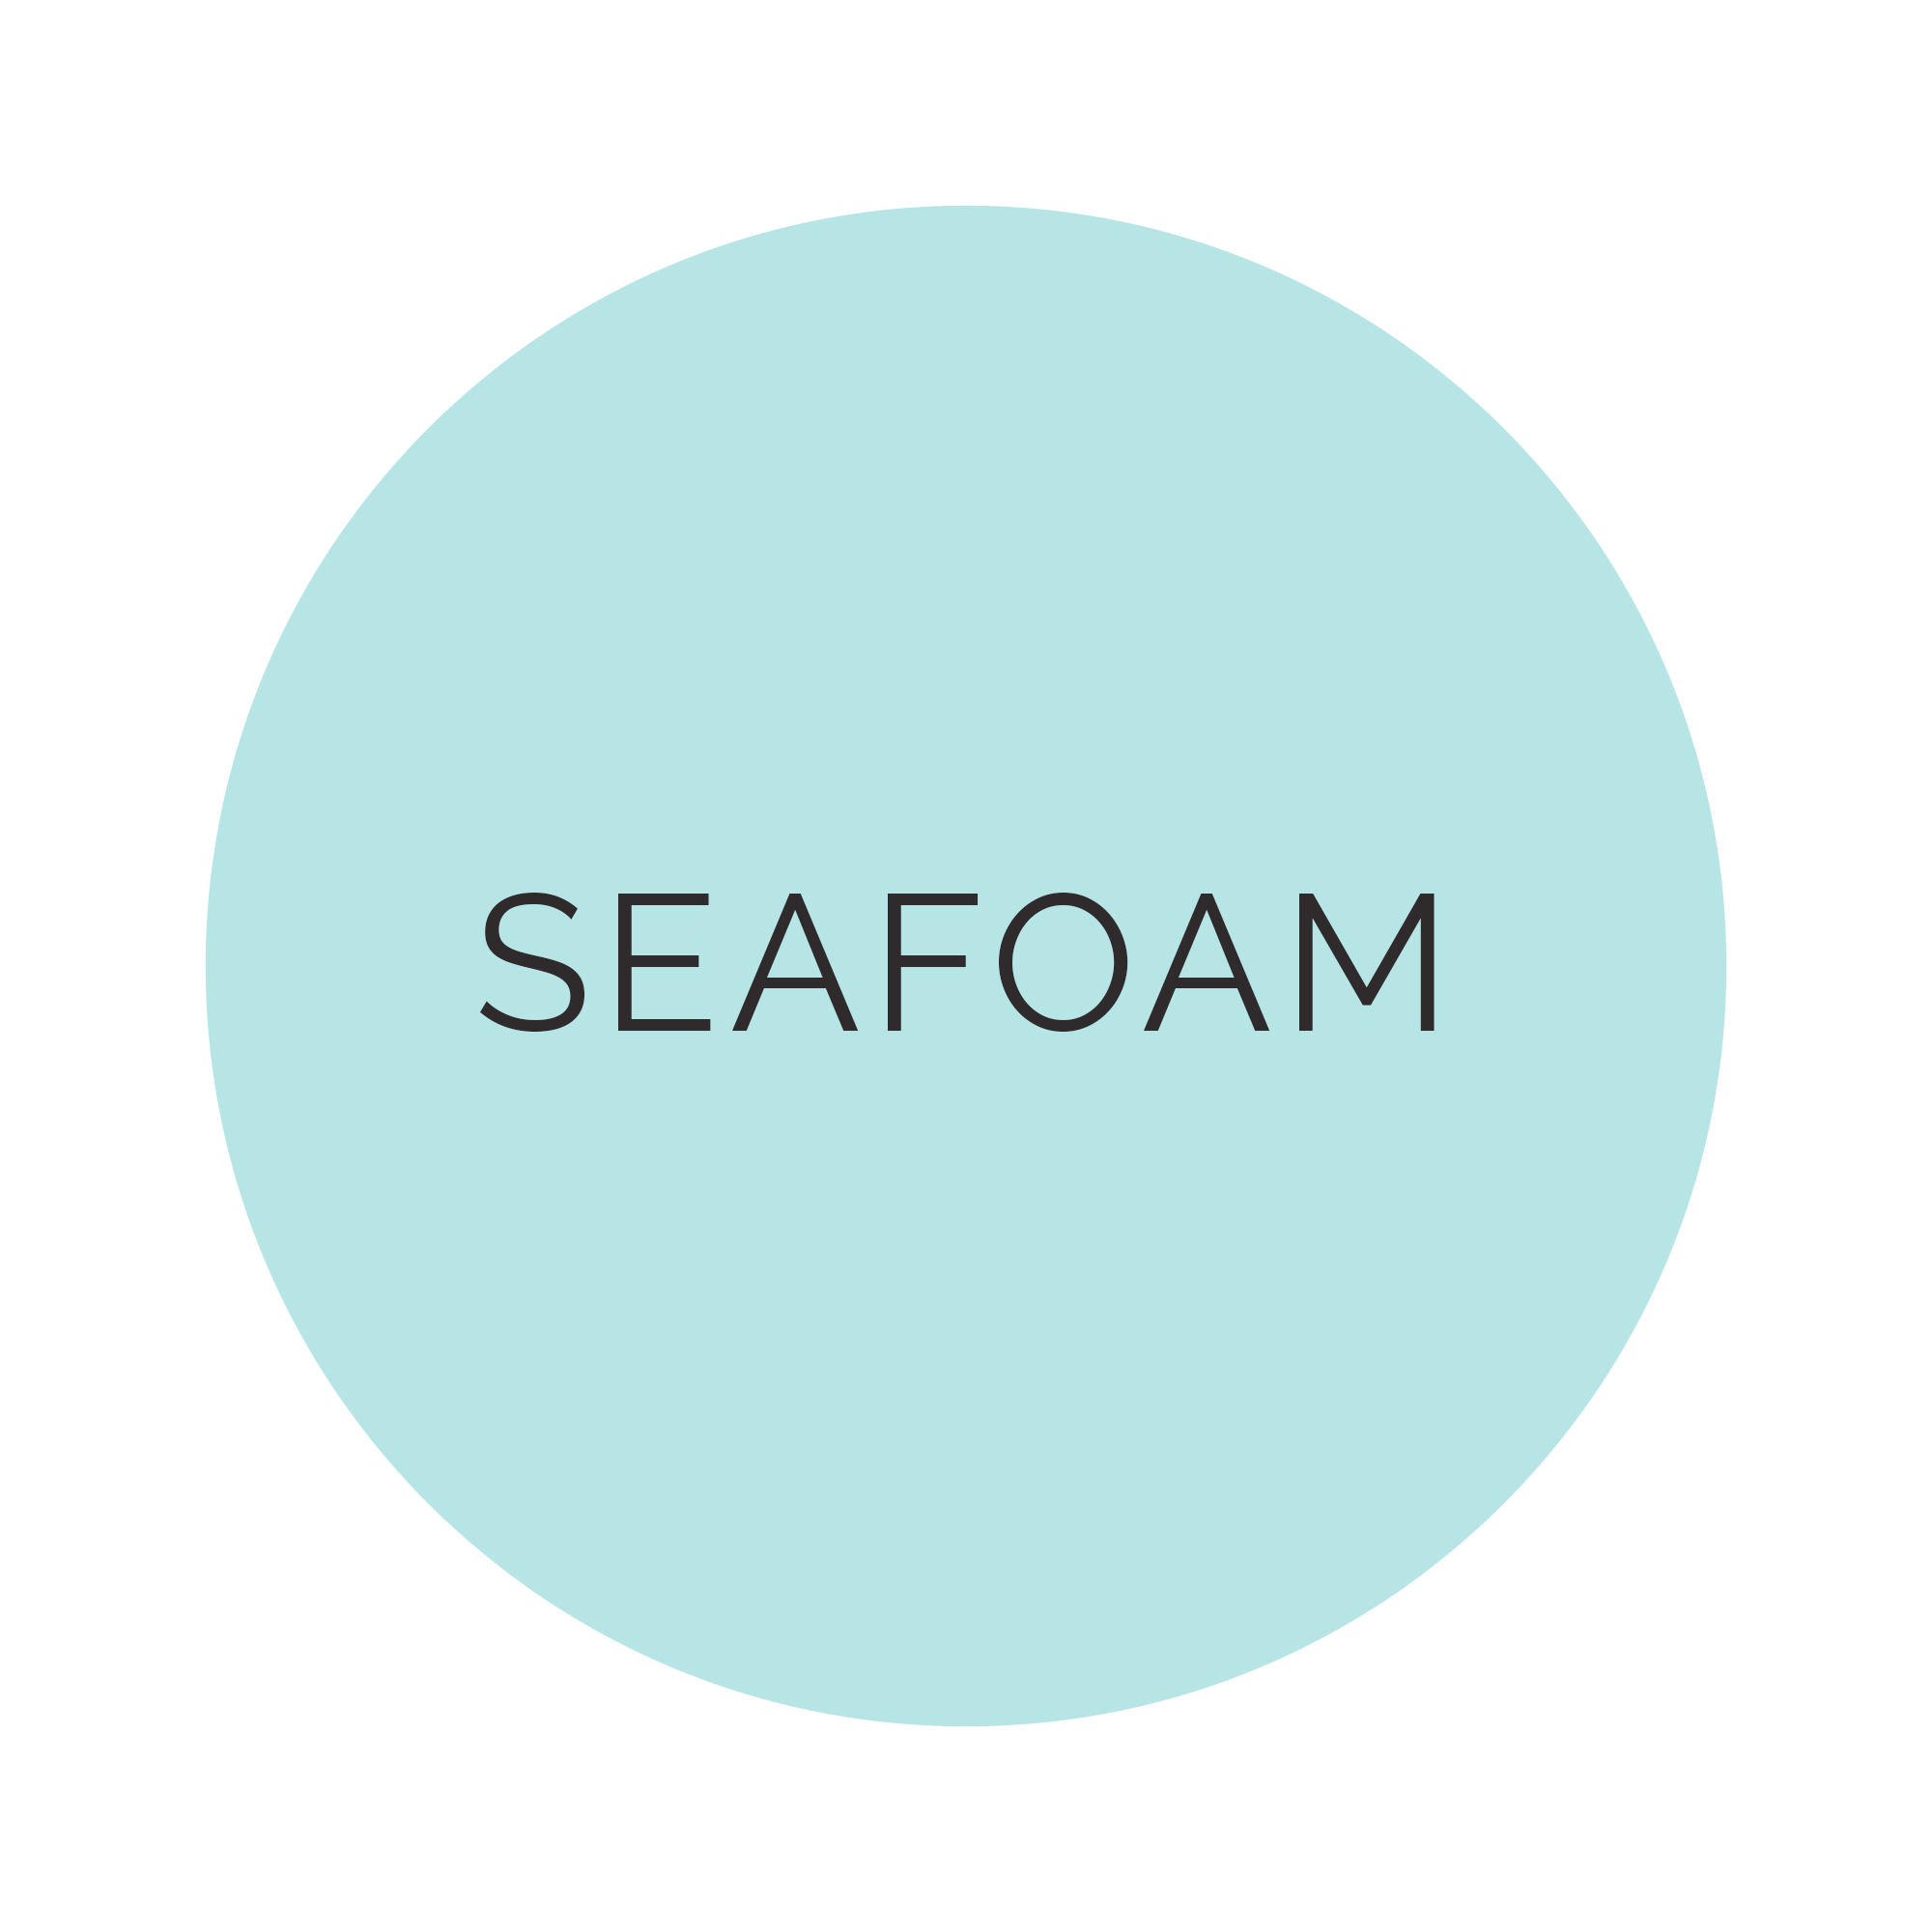 Shade Collection Seafoam Dinner Plates